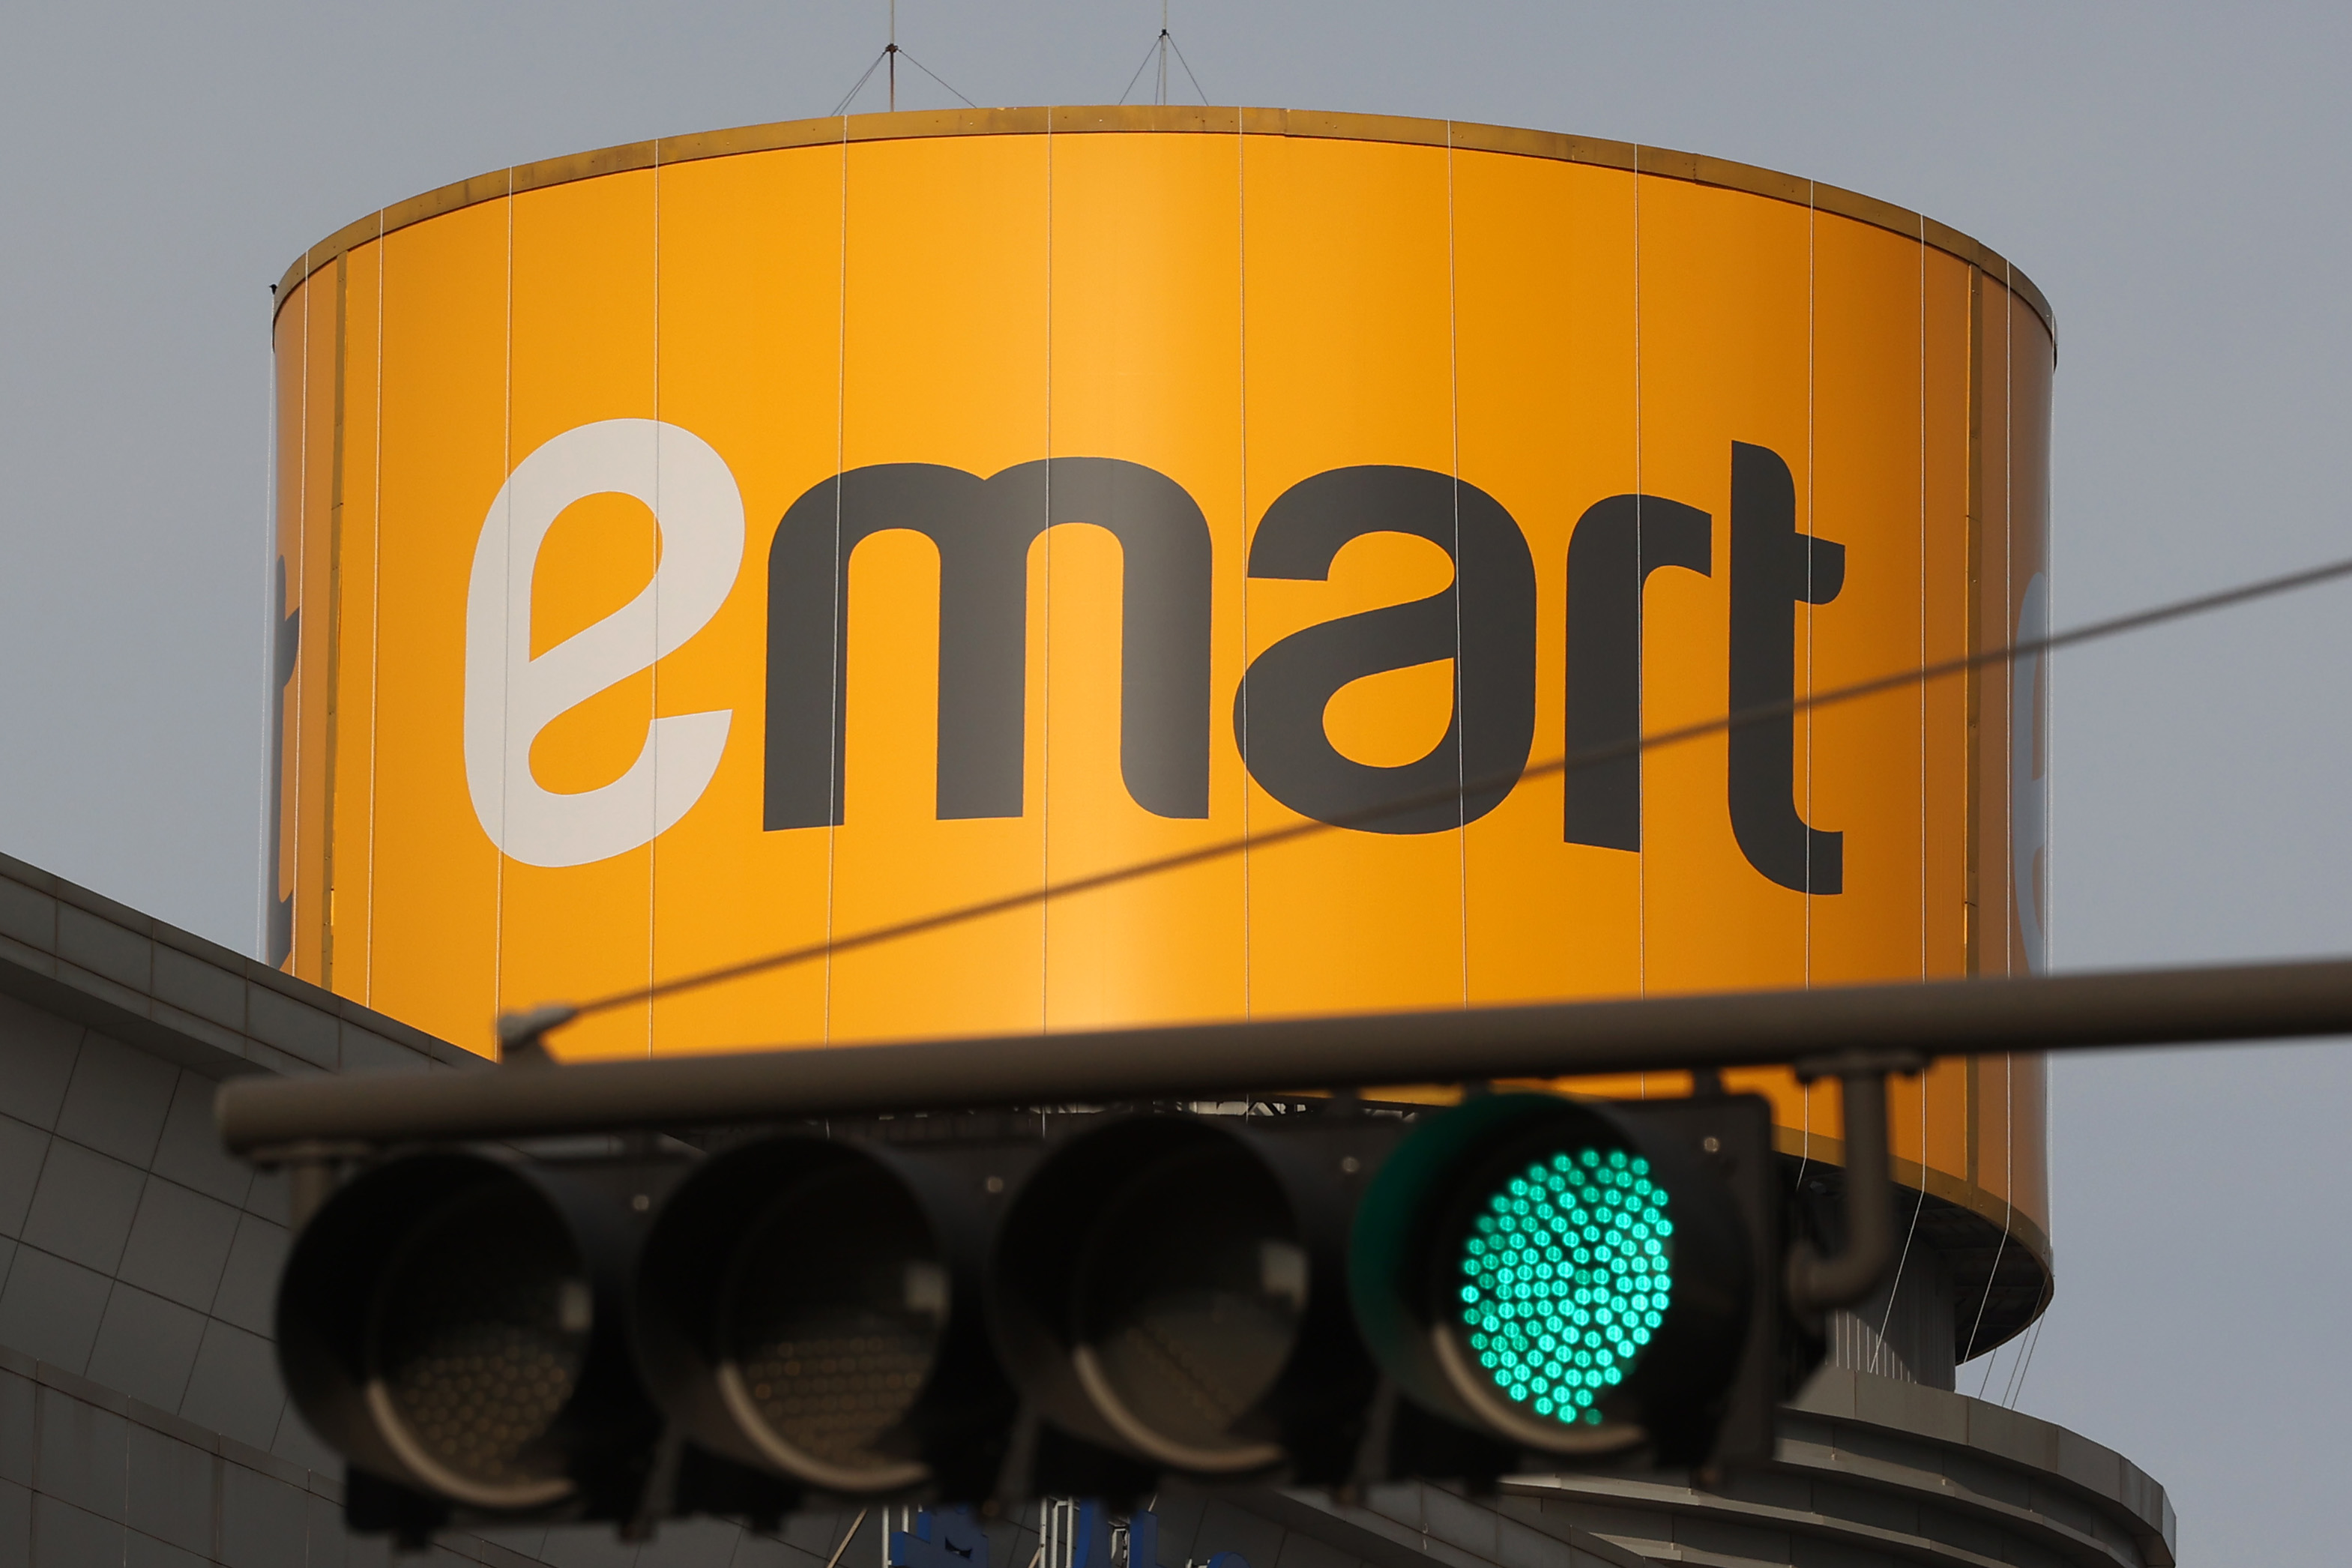 📸 Purchase any Emart brand products worth 𝐑𝐌𝟏𝟎 & above at  participating outlet to become the 𝐄𝐦𝐚𝐫𝐭 𝐁𝐫𝐚𝐧𝐝 𝐏𝐡𝐨𝐭𝐨  𝐀𝐦𝐛𝐚𝐬𝐬𝐚𝐝𝐨𝐫😍 ❗Registration…